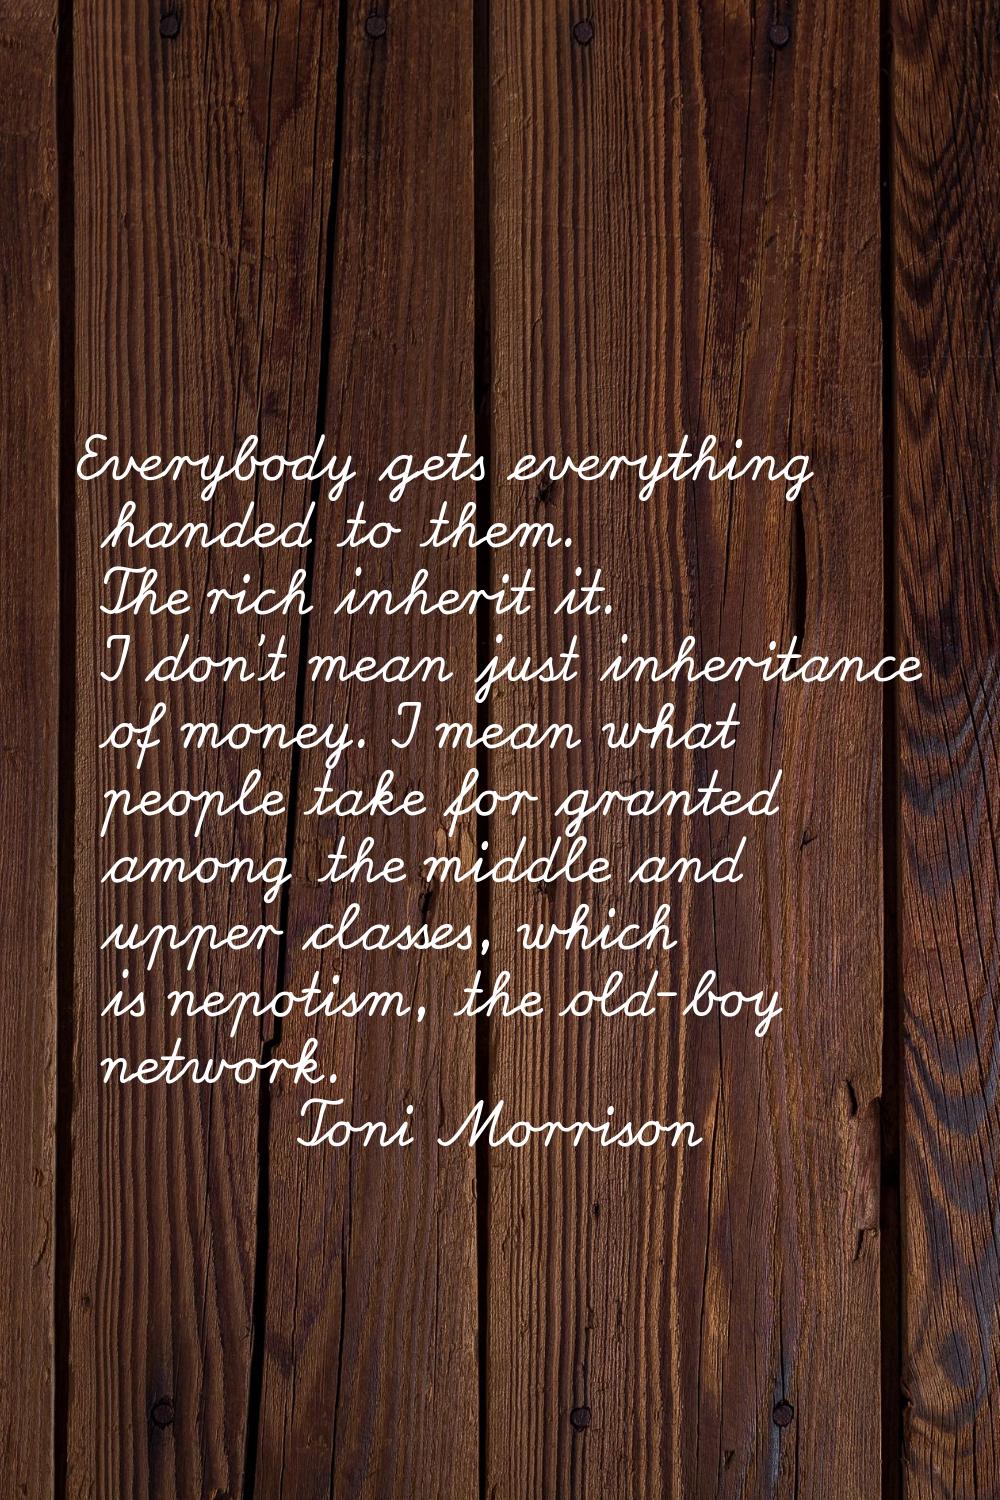 Everybody gets everything handed to them. The rich inherit it. I don't mean just inheritance of mon